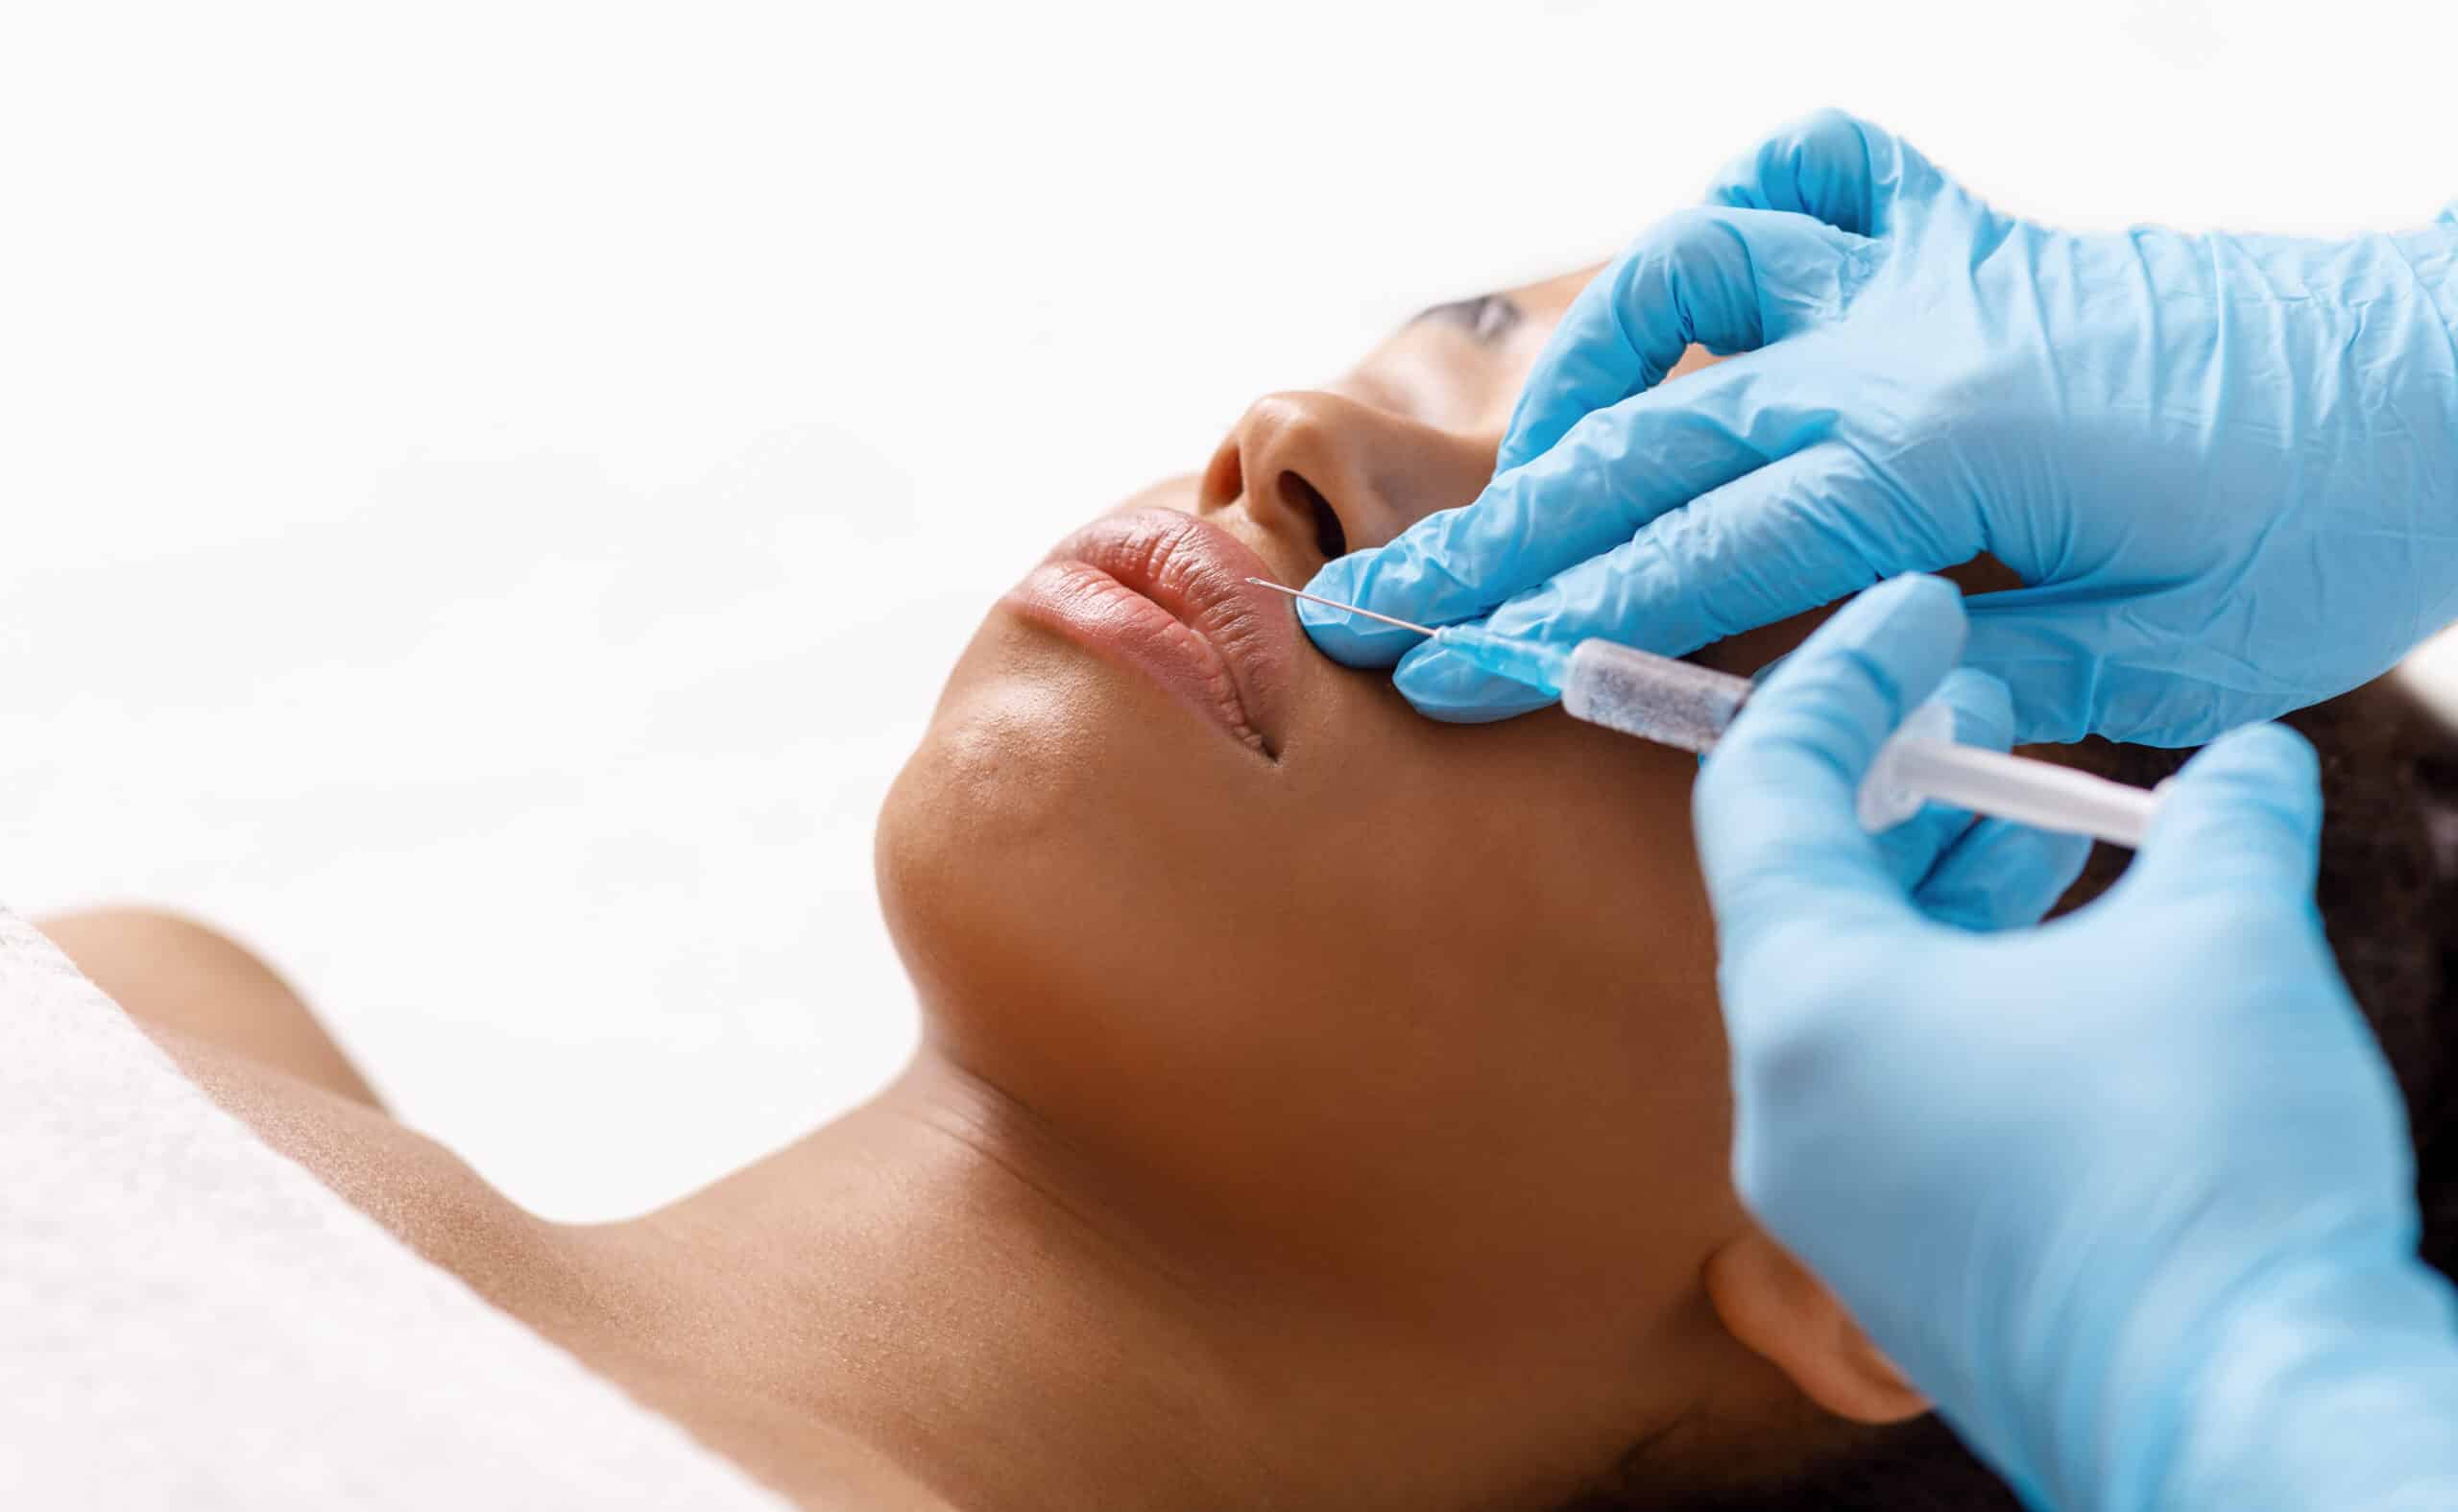 Blue medical spa offers the lip flip as an alternative lip aesthetic treatment in Los Angeles.